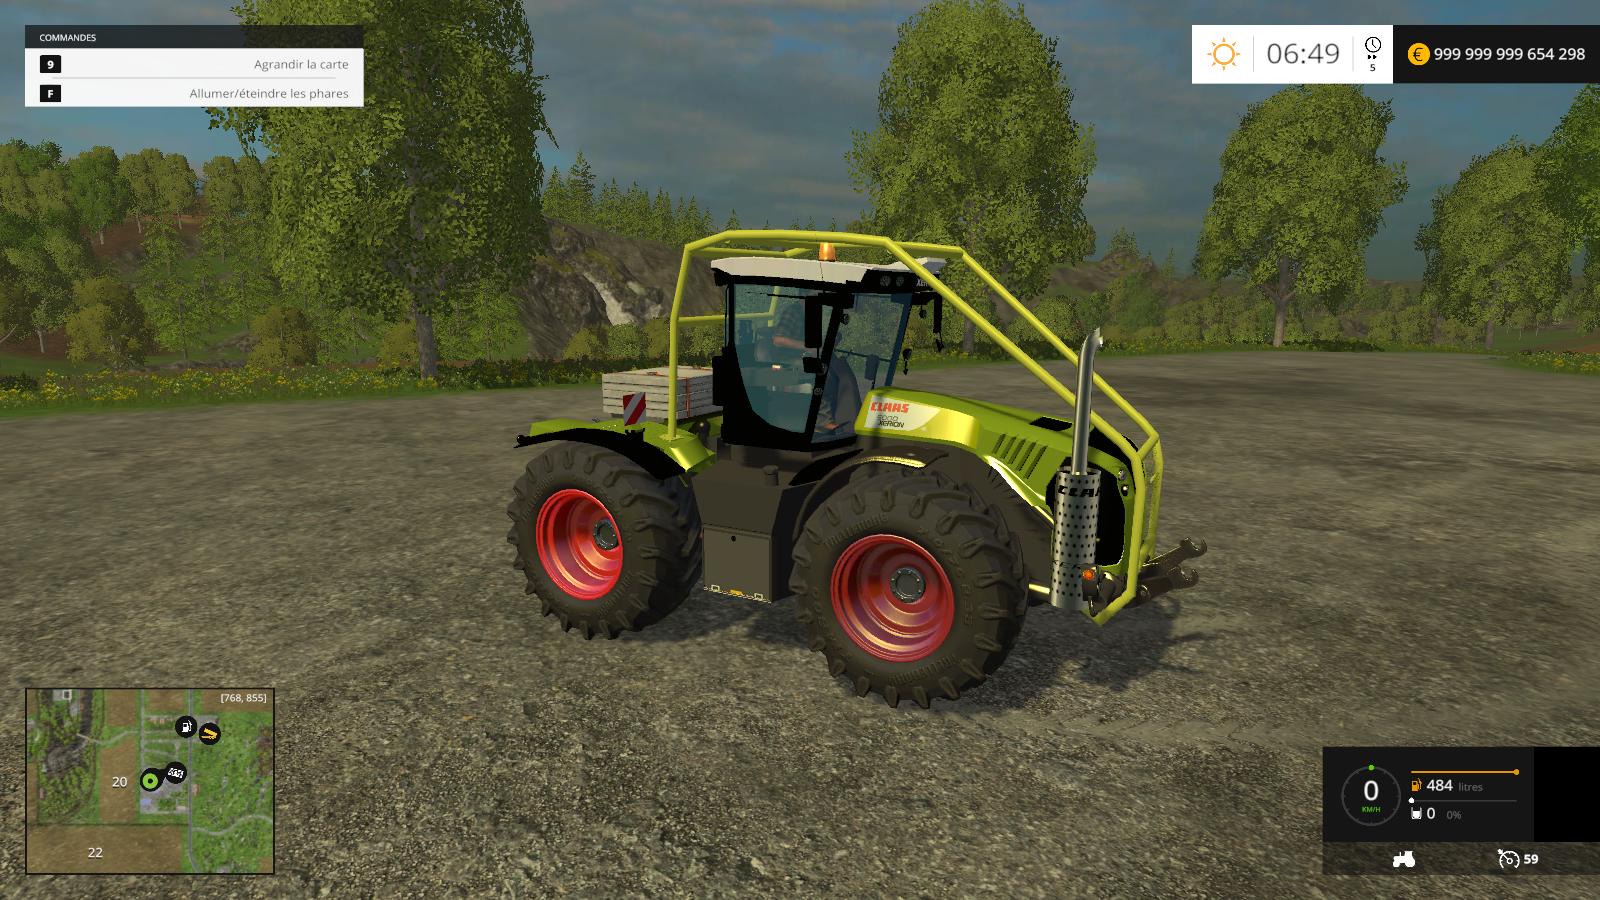  FORESTIER Page 4 of 7  Farming Simulator 2015 mods / LS FS 2015 mods